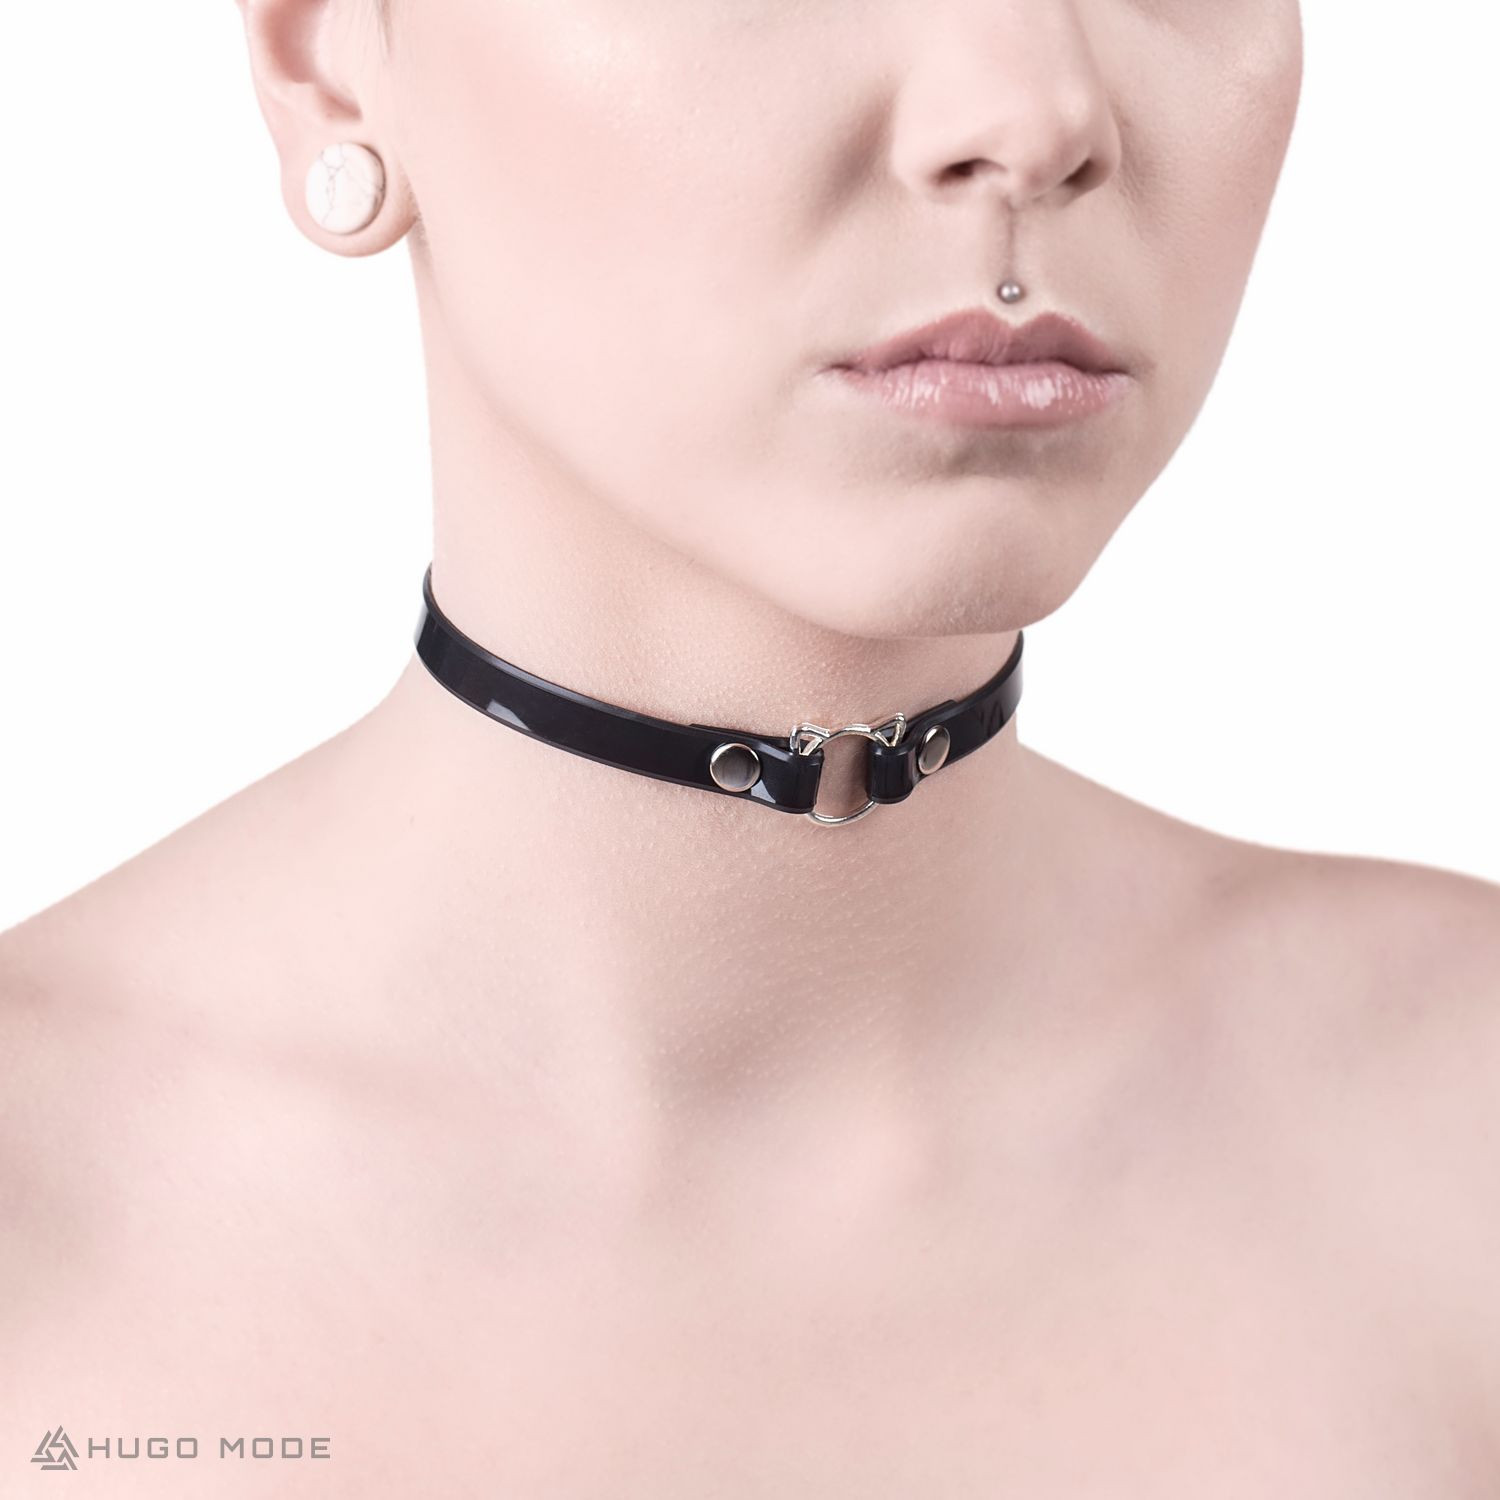 A thin choker decorated with a ring with cat ears in the front.